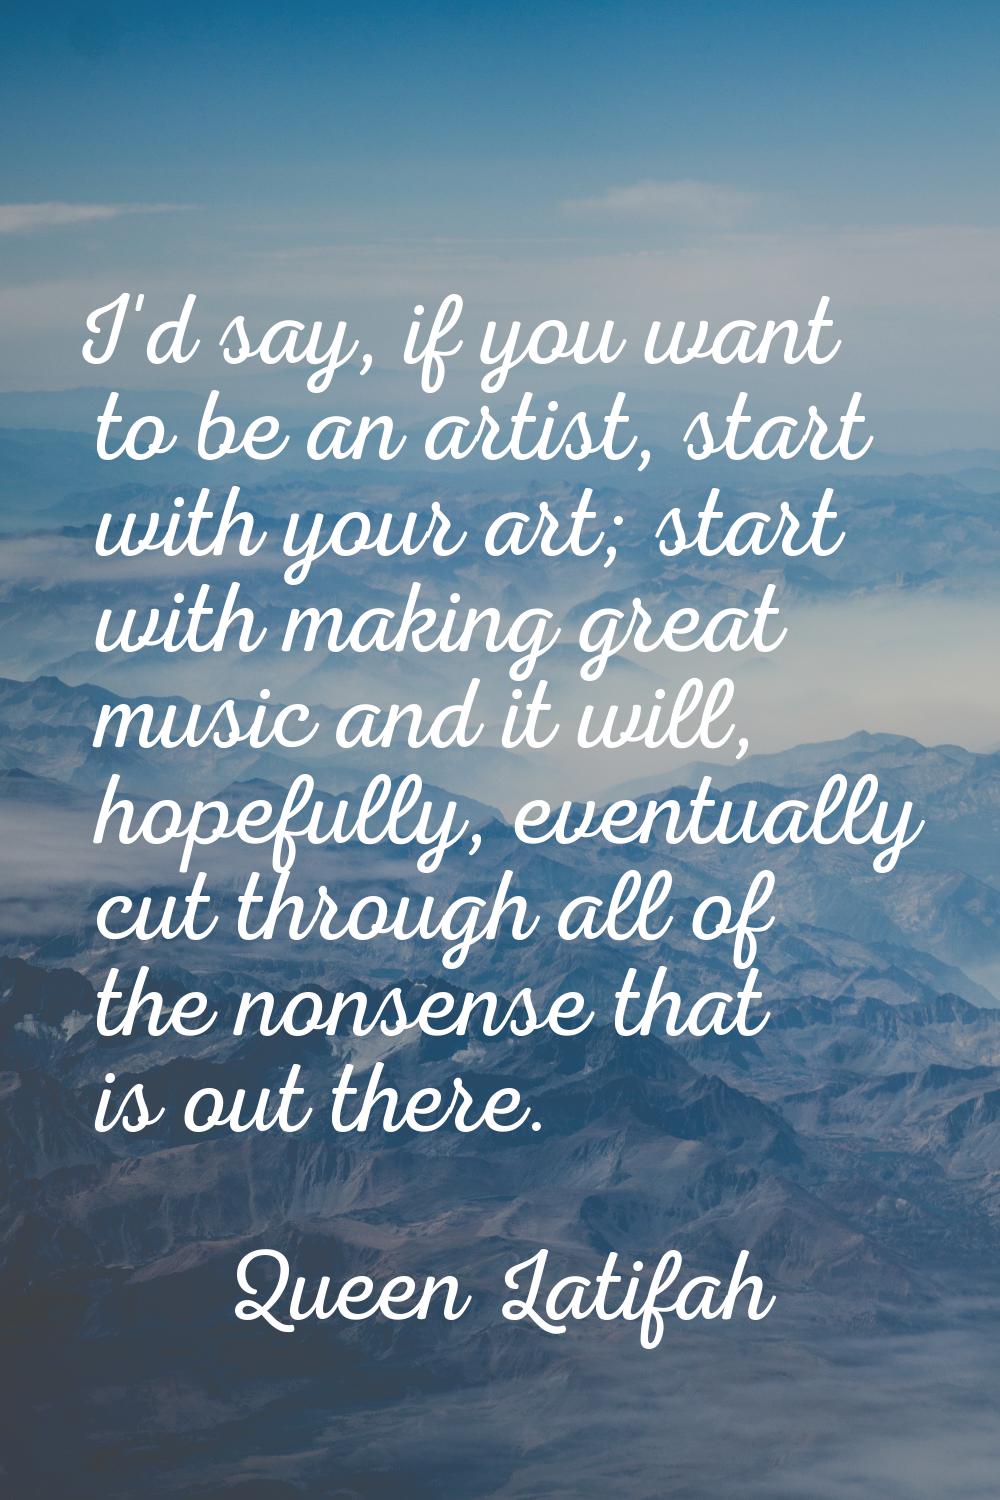 I'd say, if you want to be an artist, start with your art; start with making great music and it wil